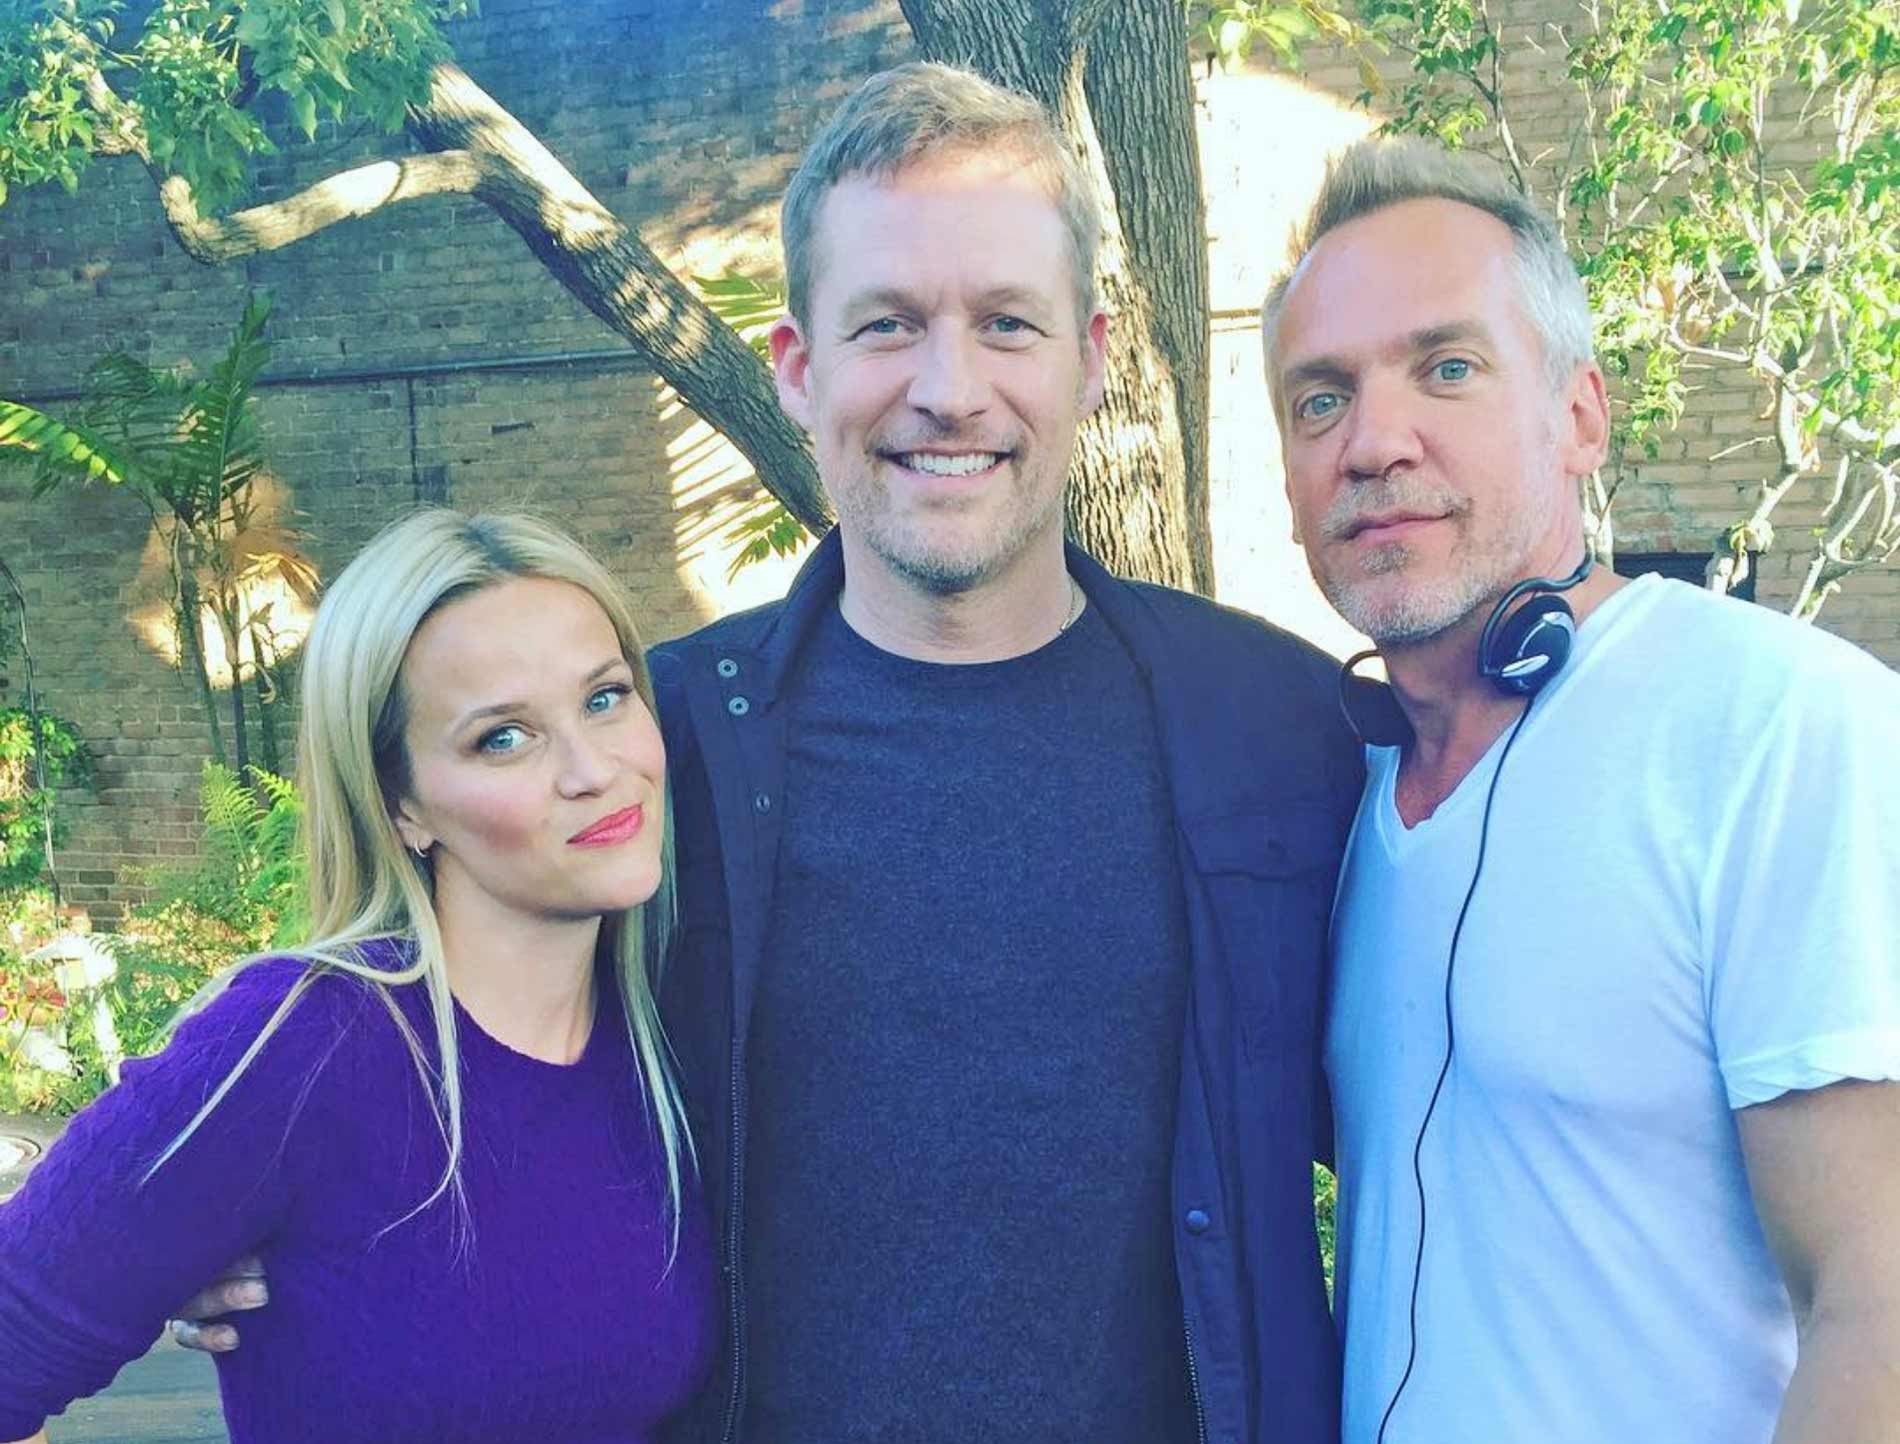 Reese Witherspoon, James Tupper and Jean-Marc Vallée on the Big Little Lies set